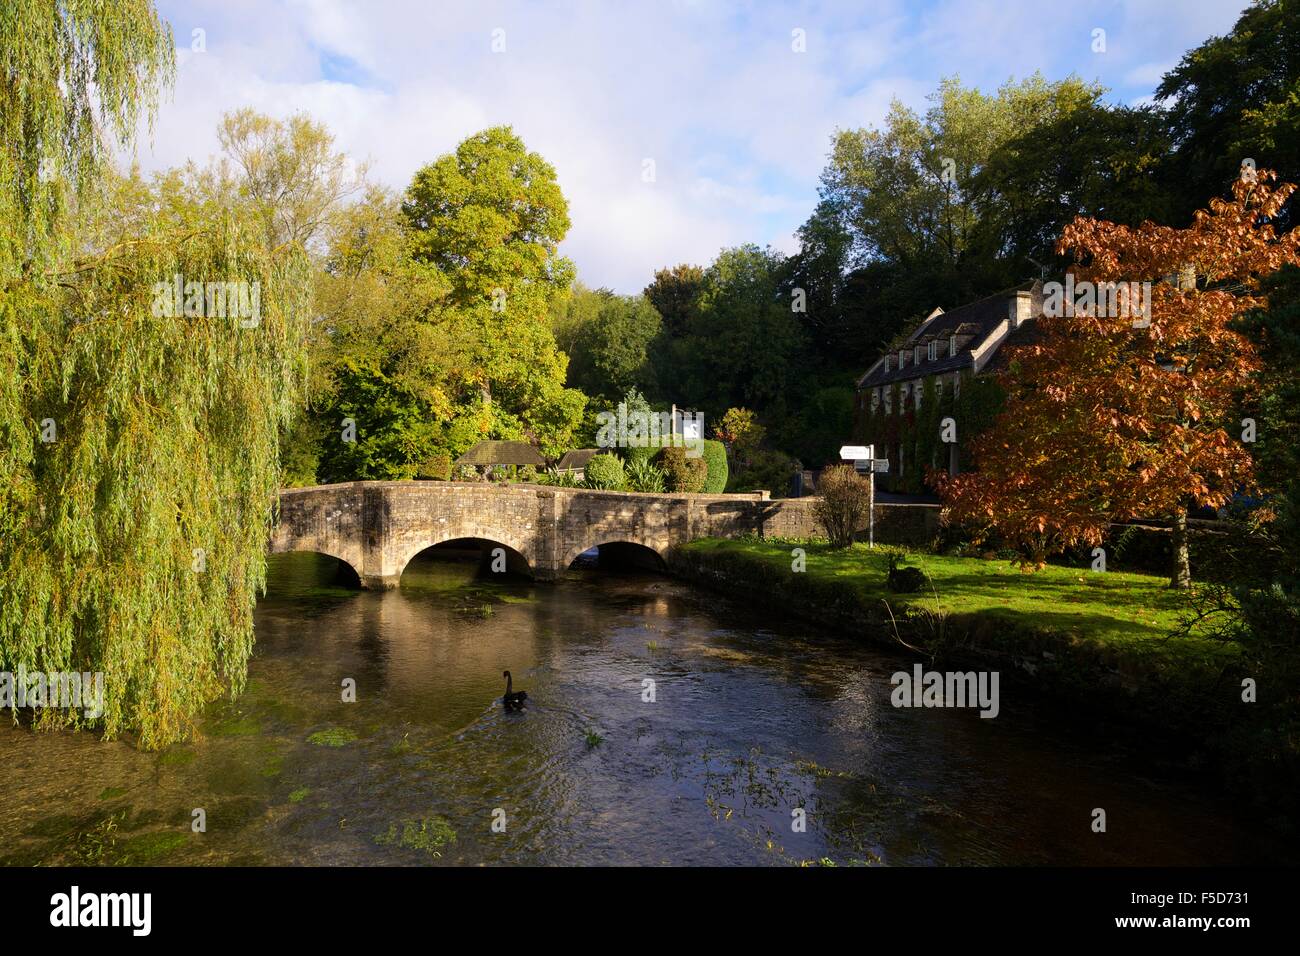 River Coln and Swan Hotel,  Bibury, Cotswolds, Gloucestershire, England, UK, GB, Europe Stock Photo